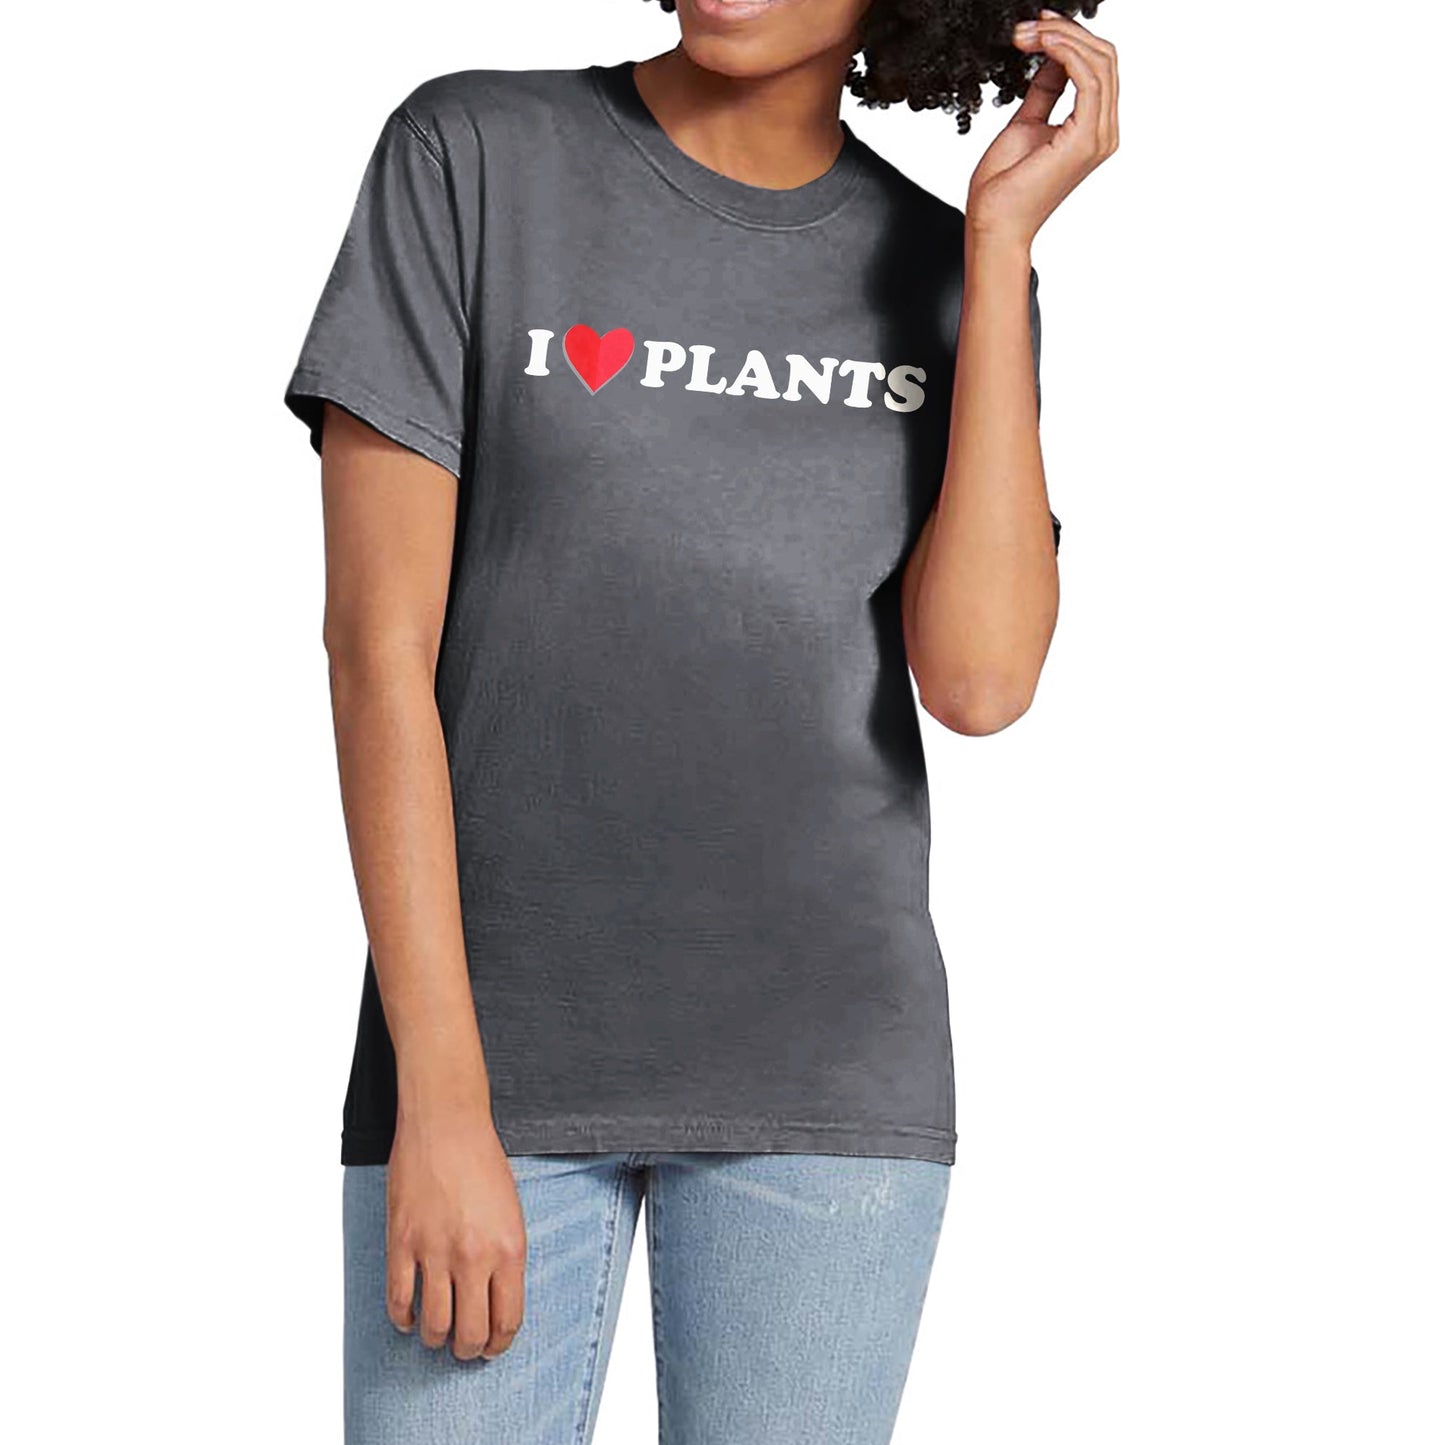 I Heart Plants Garment-Dyed Tee - Stories You Can Wear